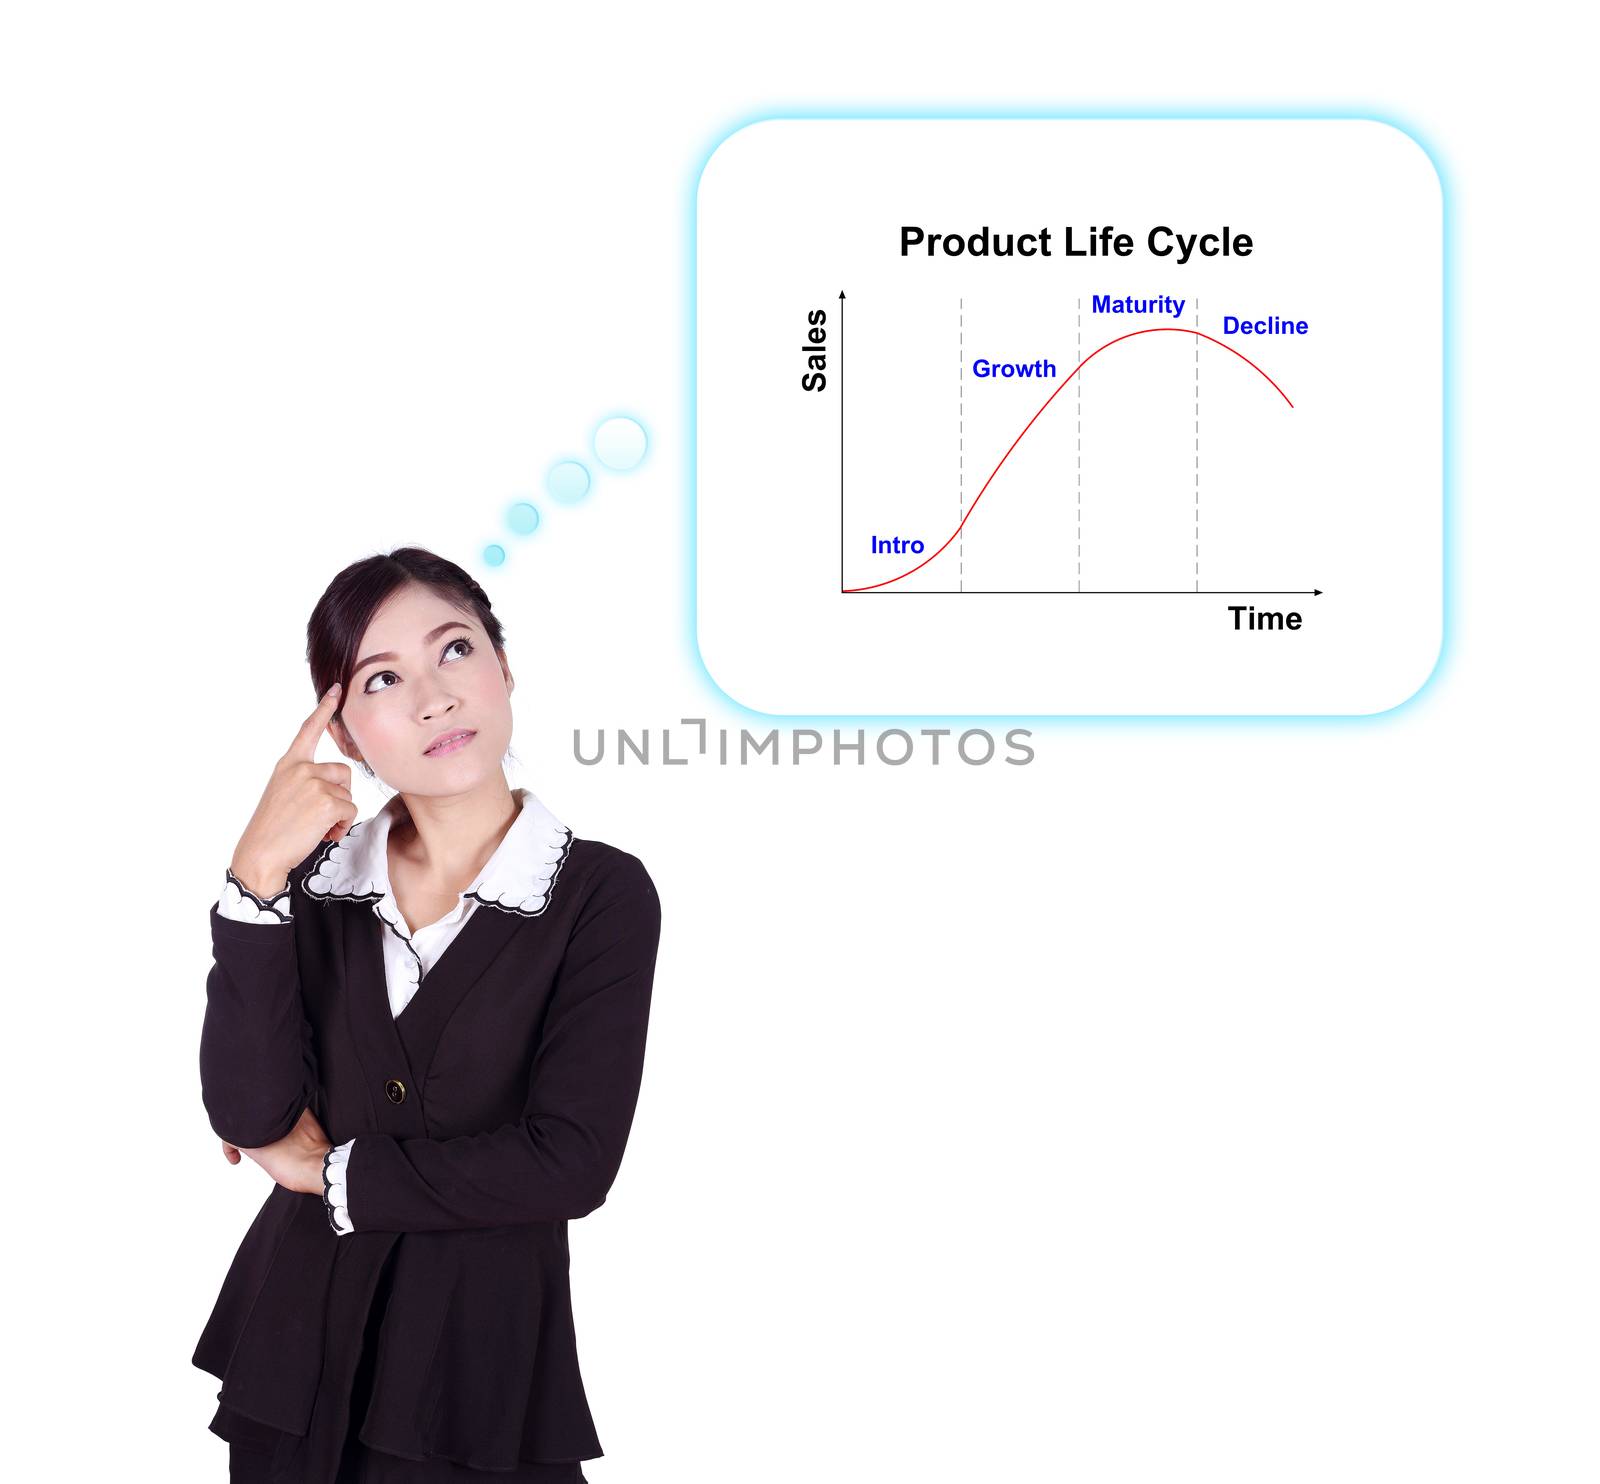 Business woman thinking about Product Life Cycle (PLC)  by geargodz